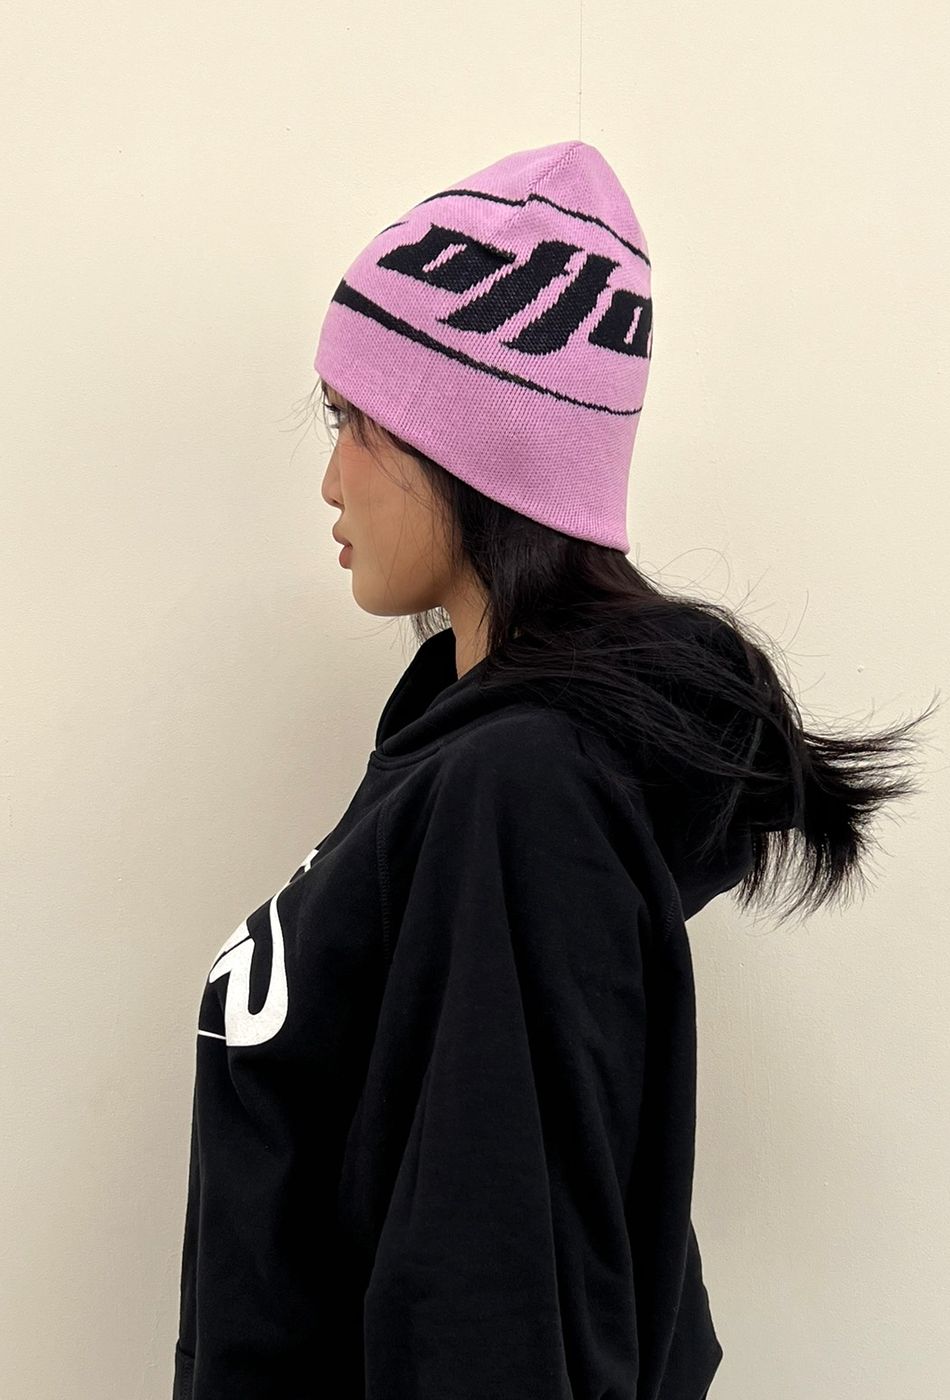  OFFONOFF LGV2 BEANIE / PINK  PASTEL 